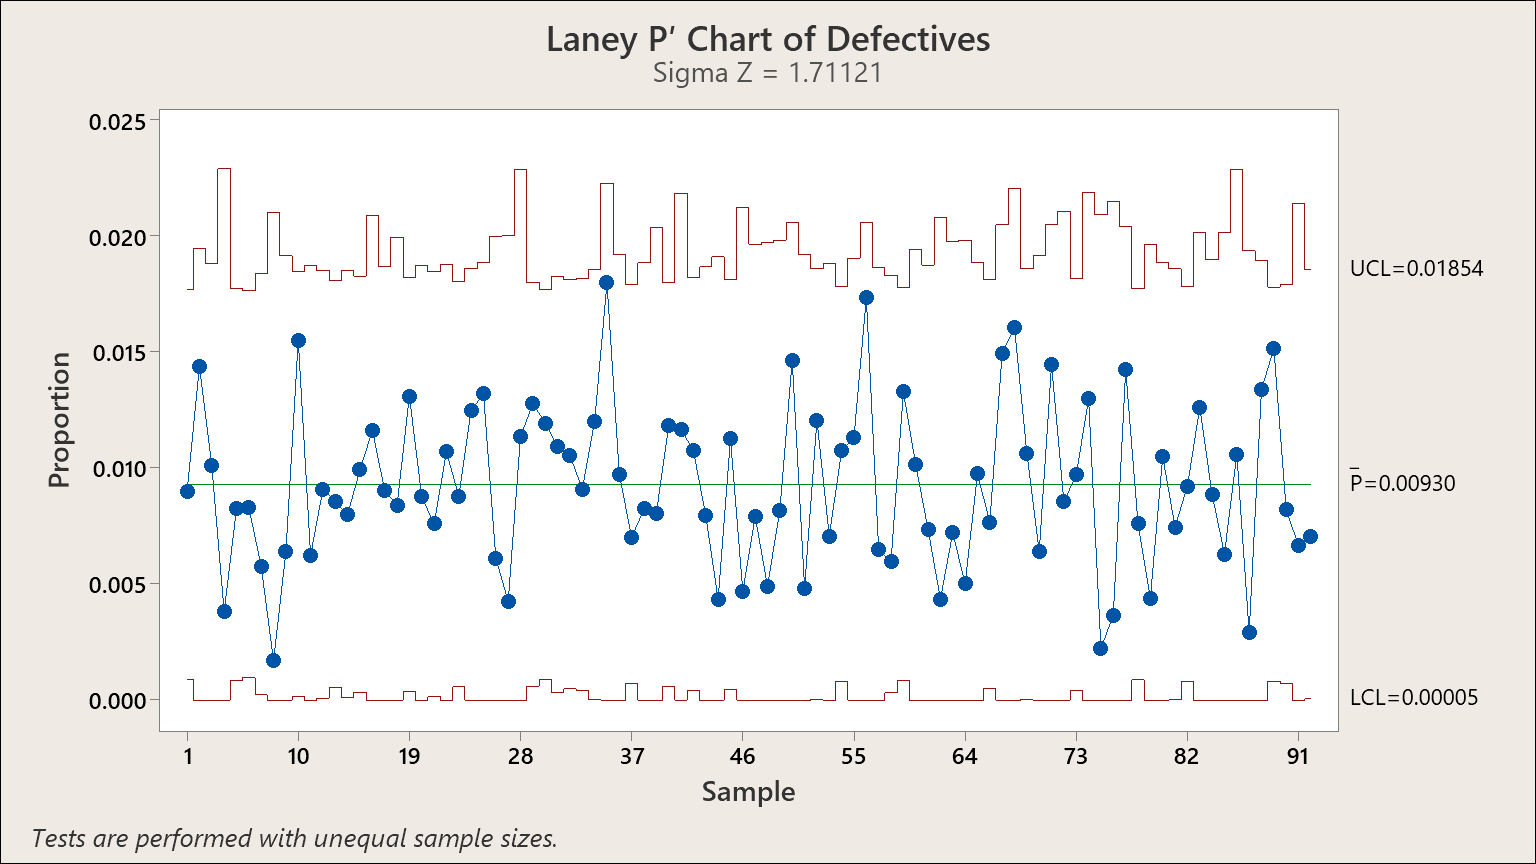 Elevating Six Sigma: The Power of the Laney P’ Chart